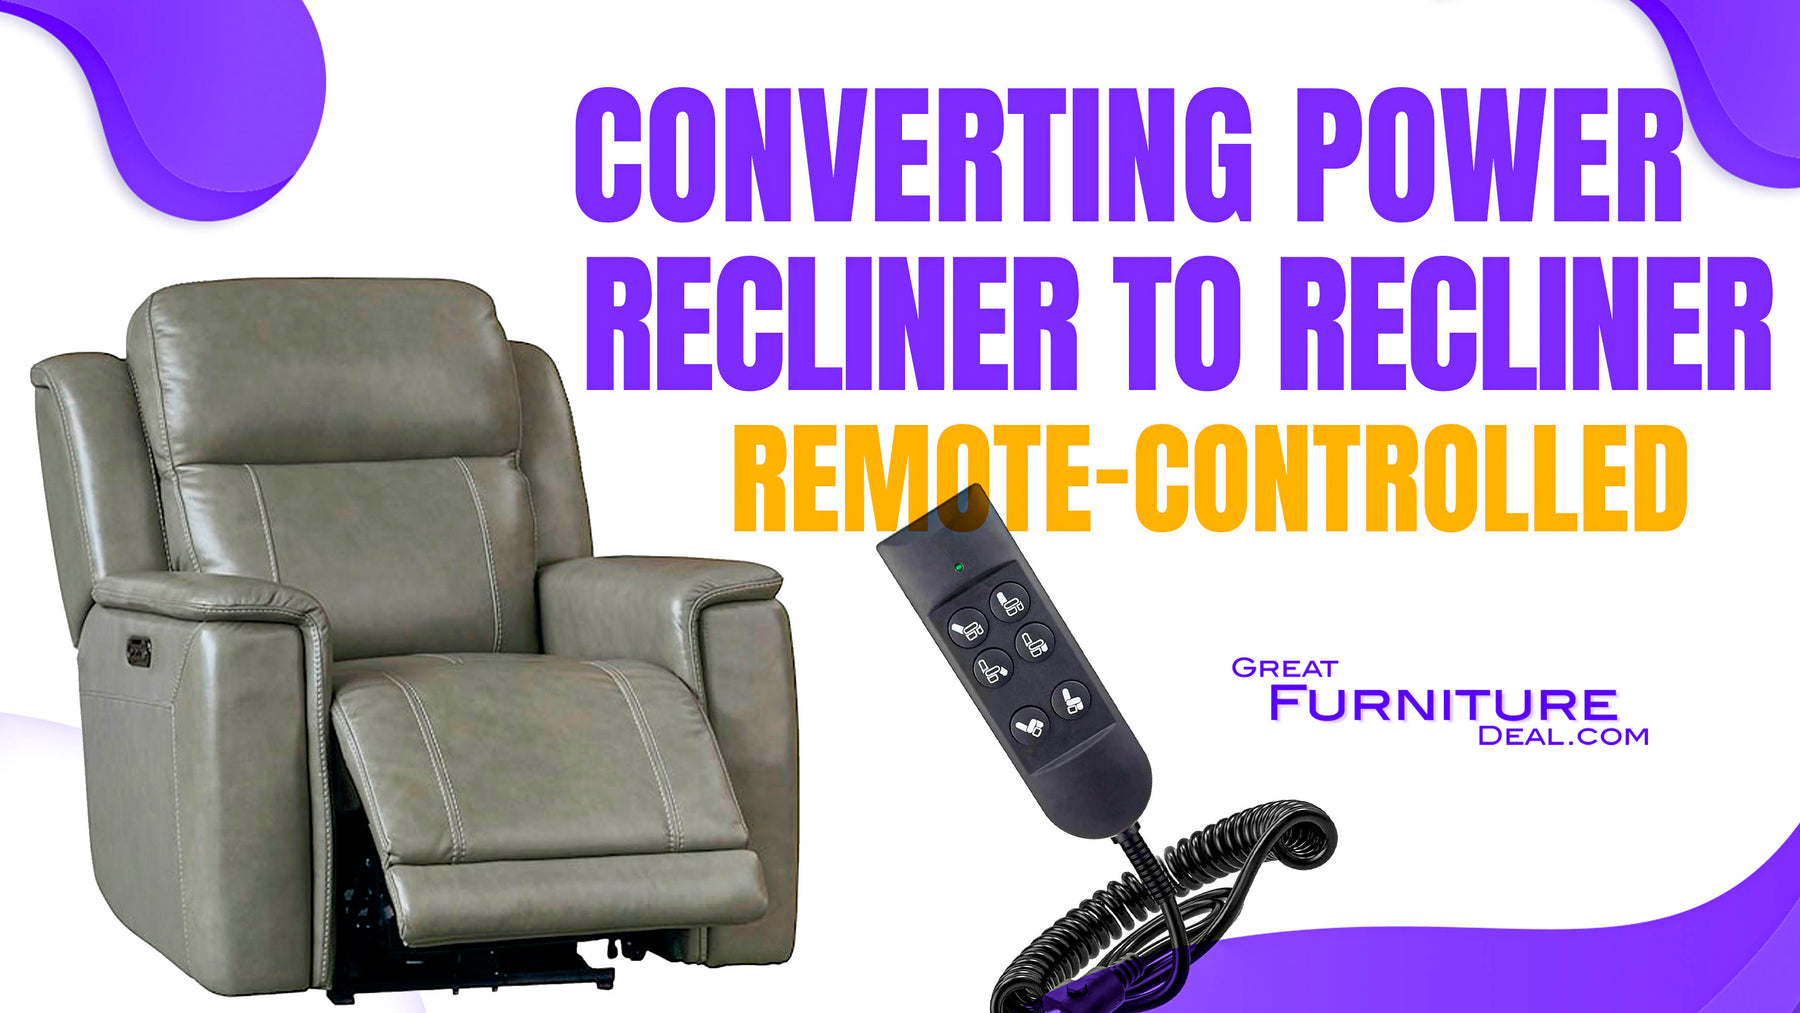 Replace your button control on your power recliner with a hand held remote - diy.